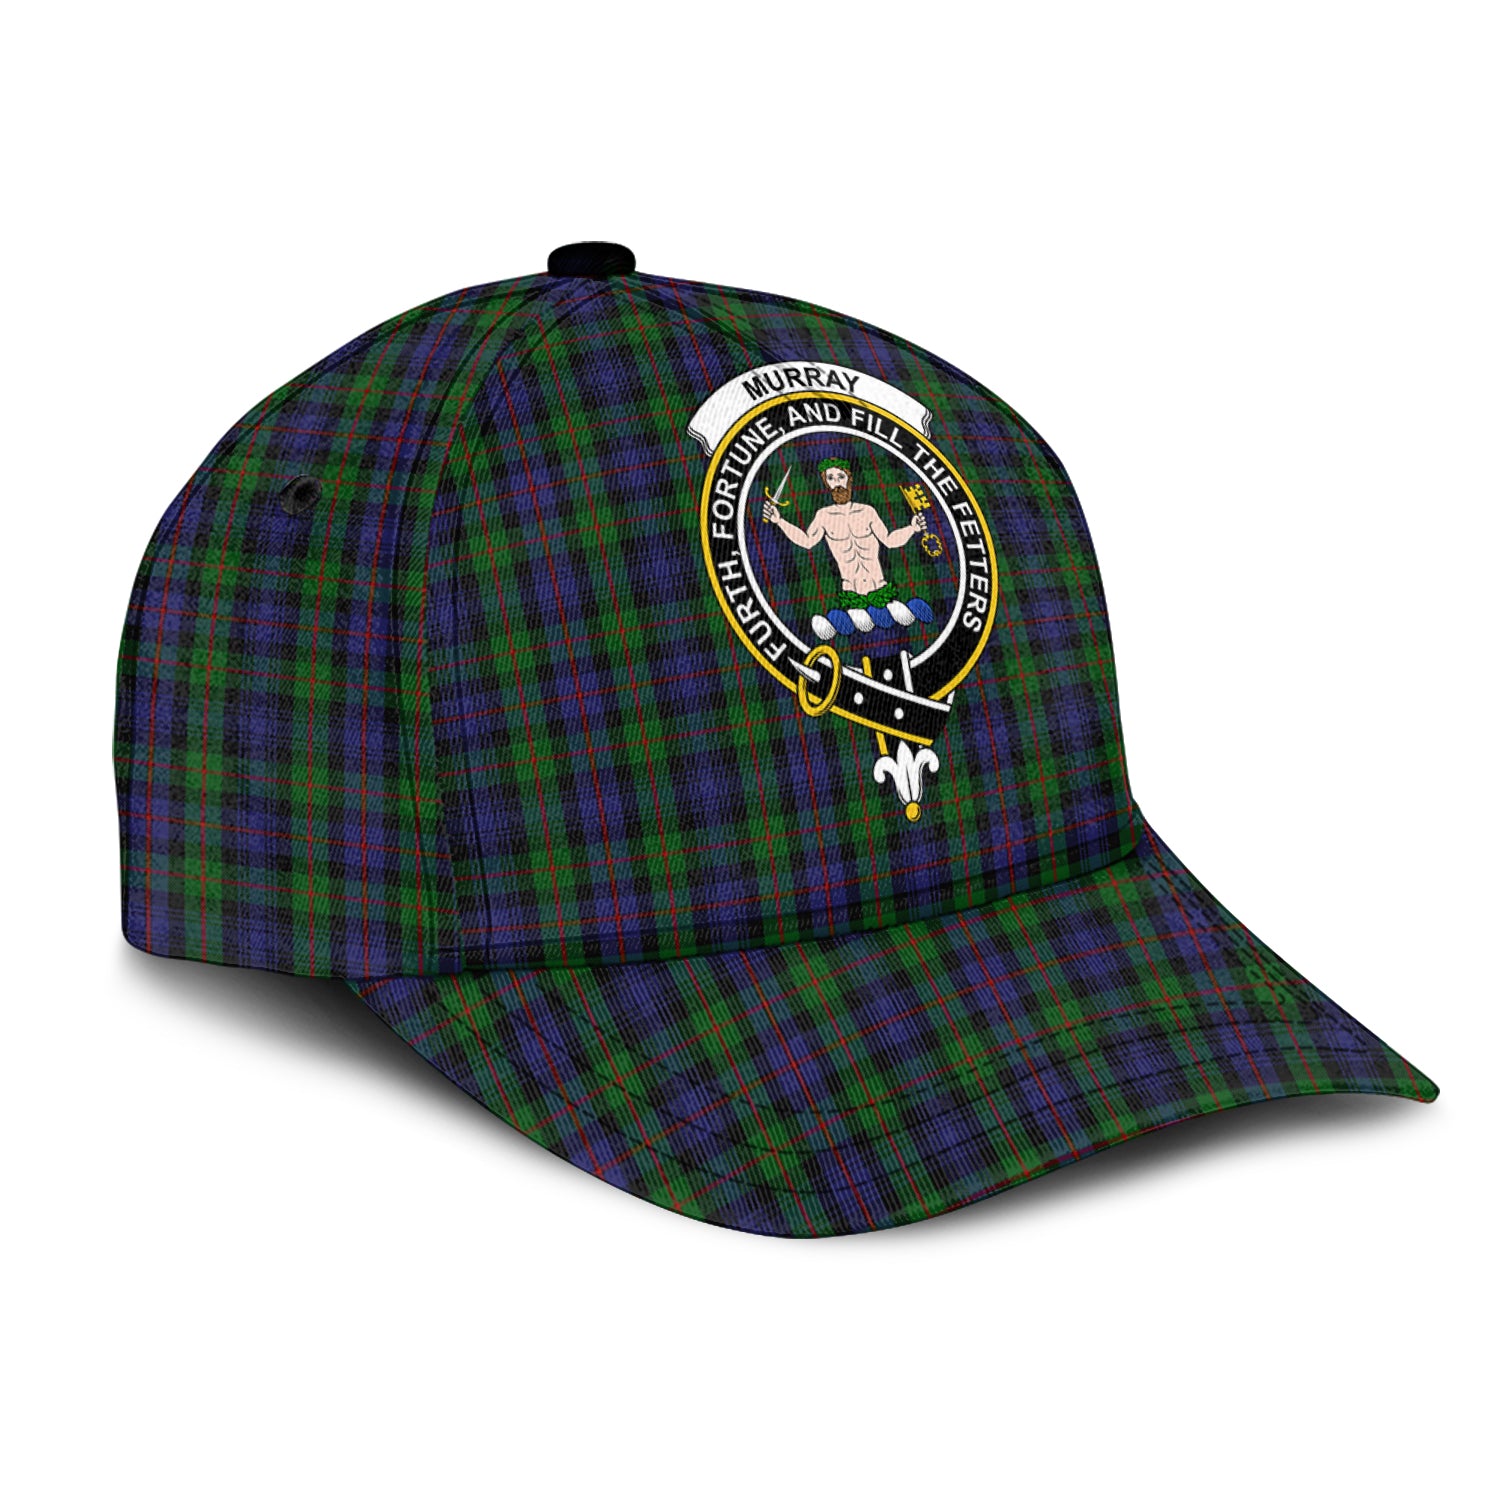 murray-of-atholl-tartan-classic-cap-with-family-crest